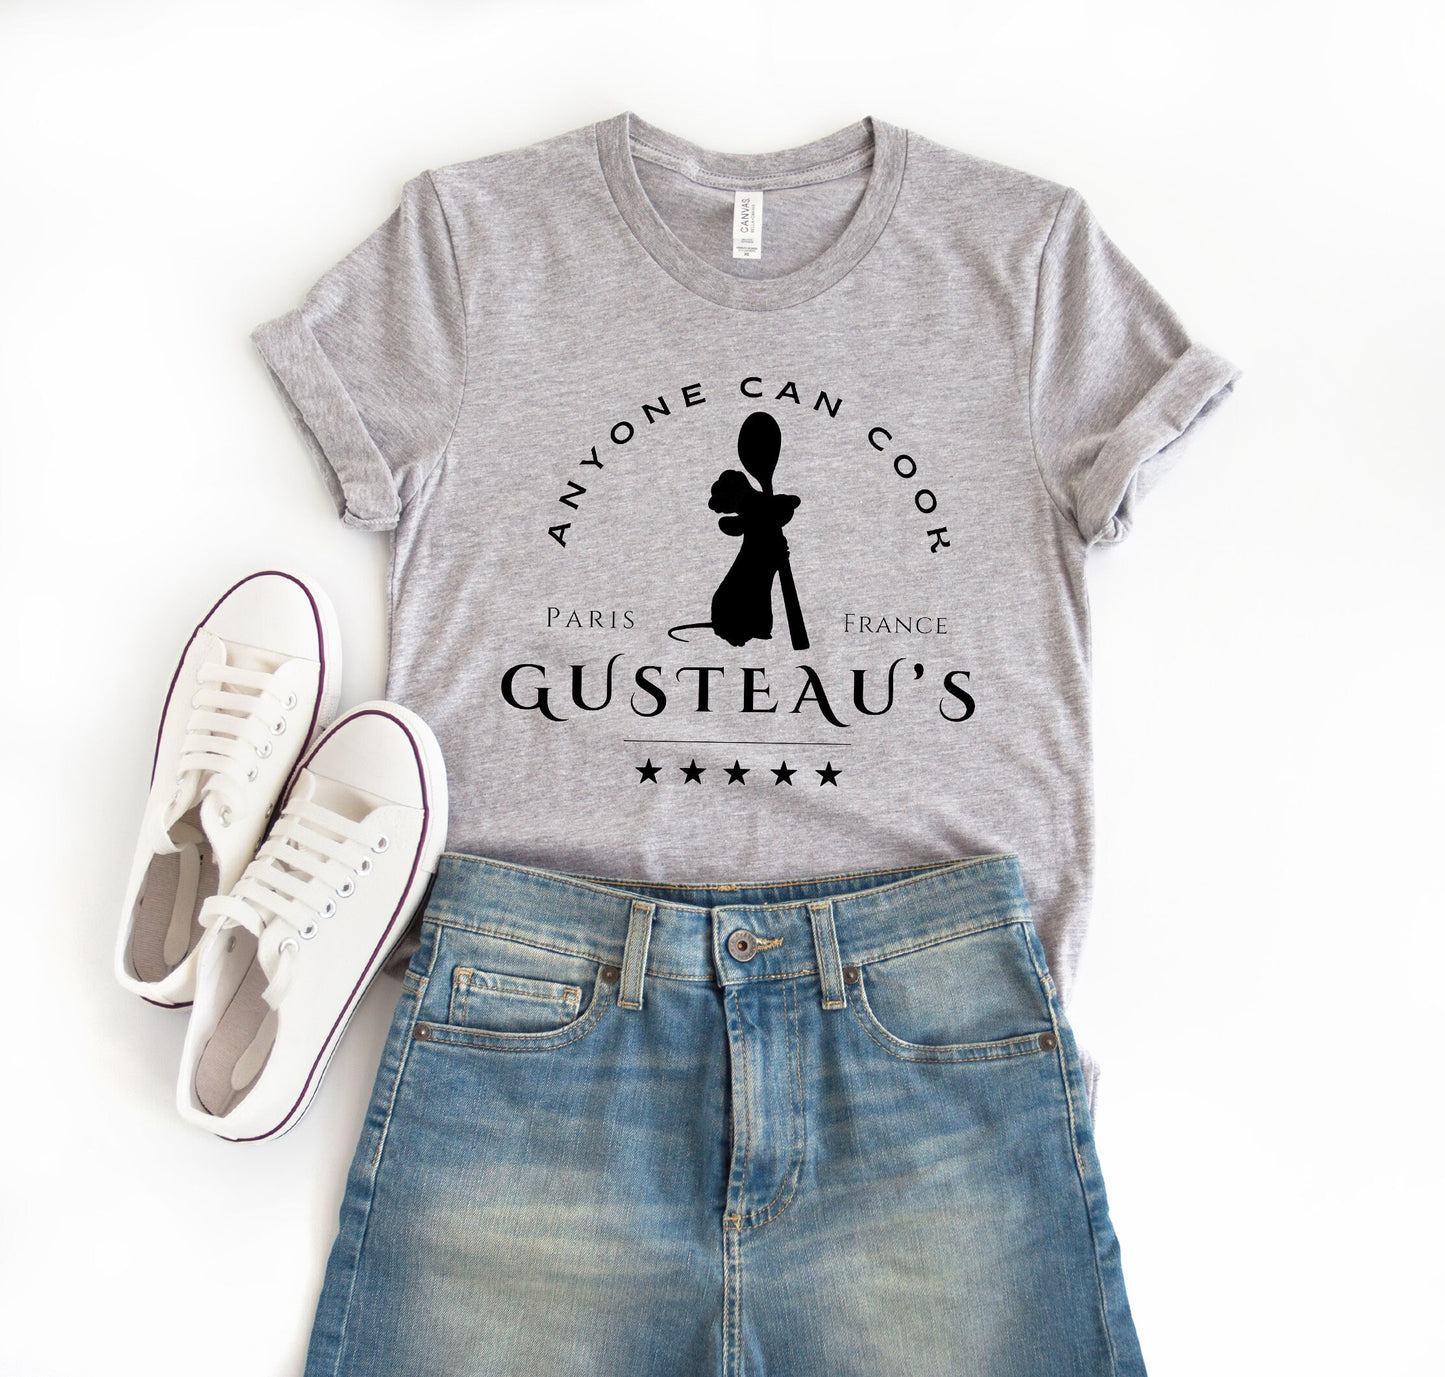 Guesteau's Anyone Can Cook Ratatouille Club Ultra Soft Graphic Tee Unisex Soft Tee T-shirt for Women or Men